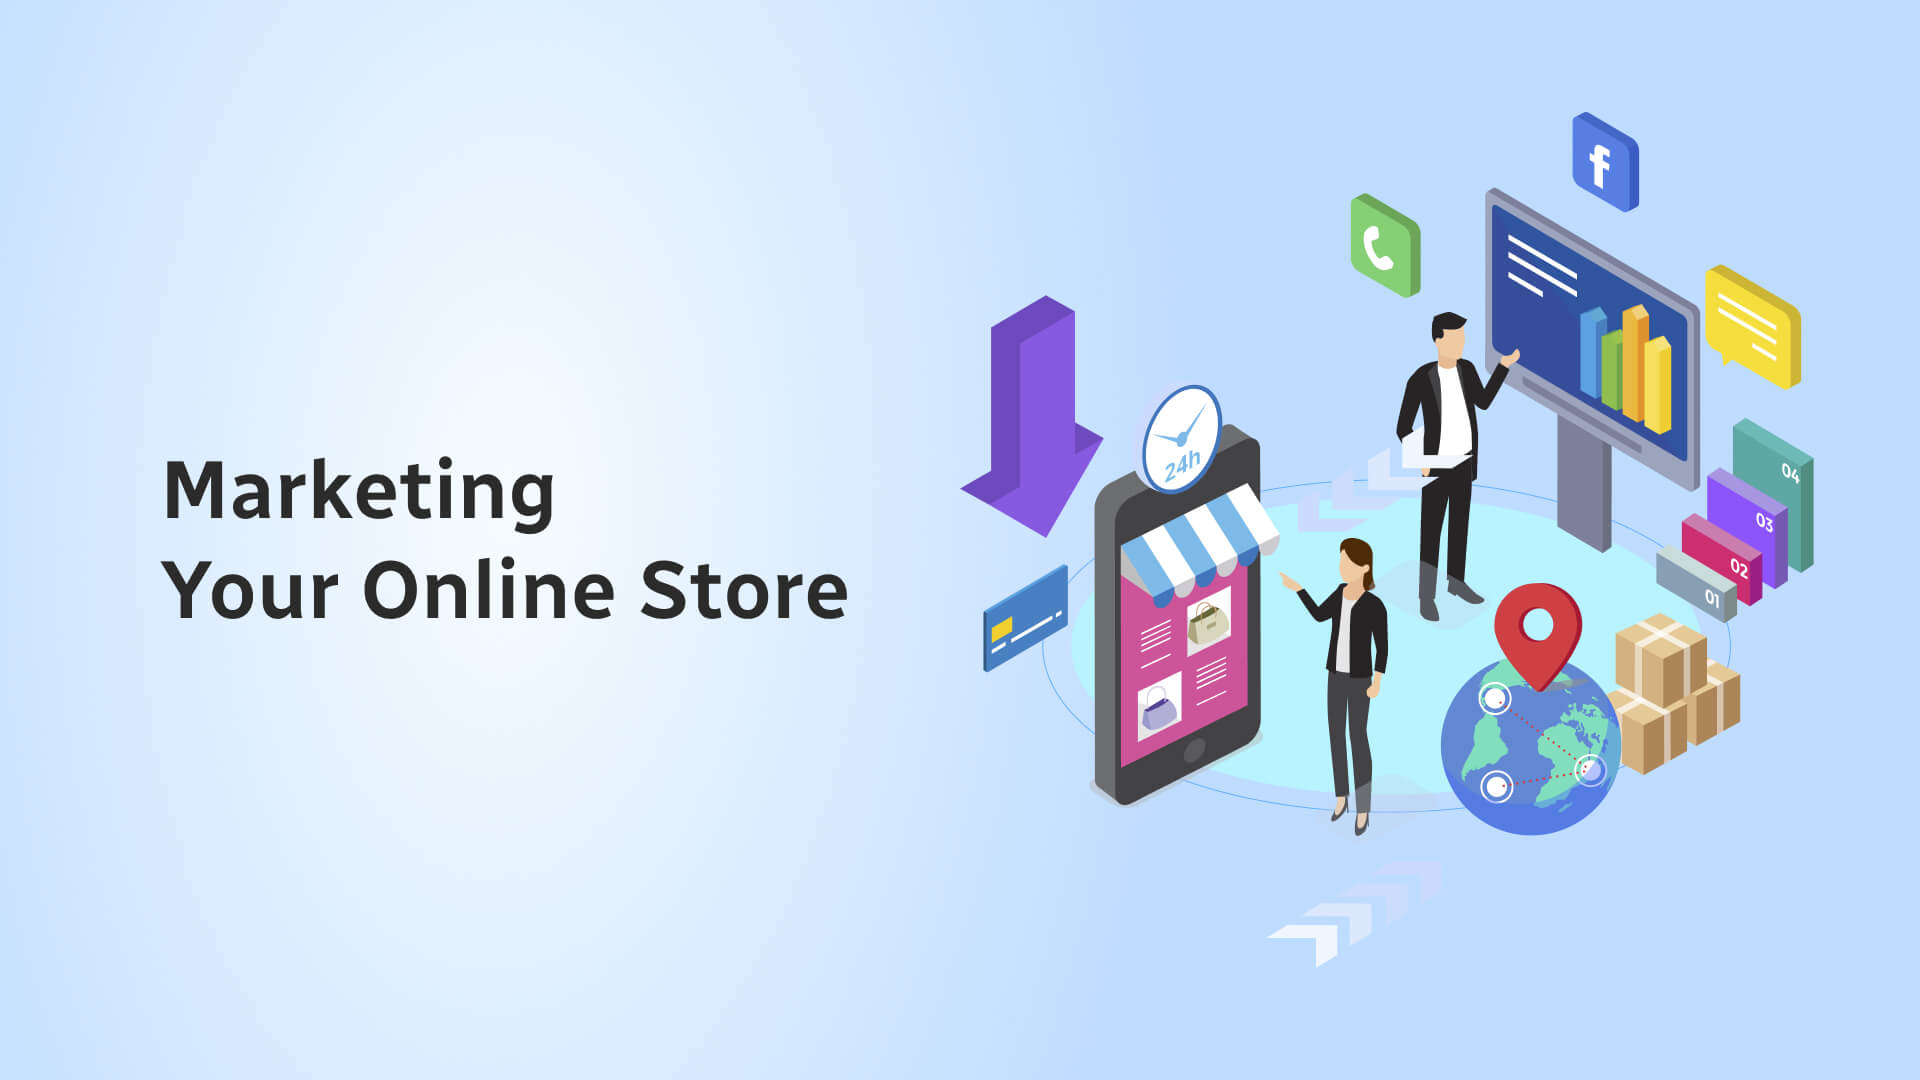 Marketing Your Online Store